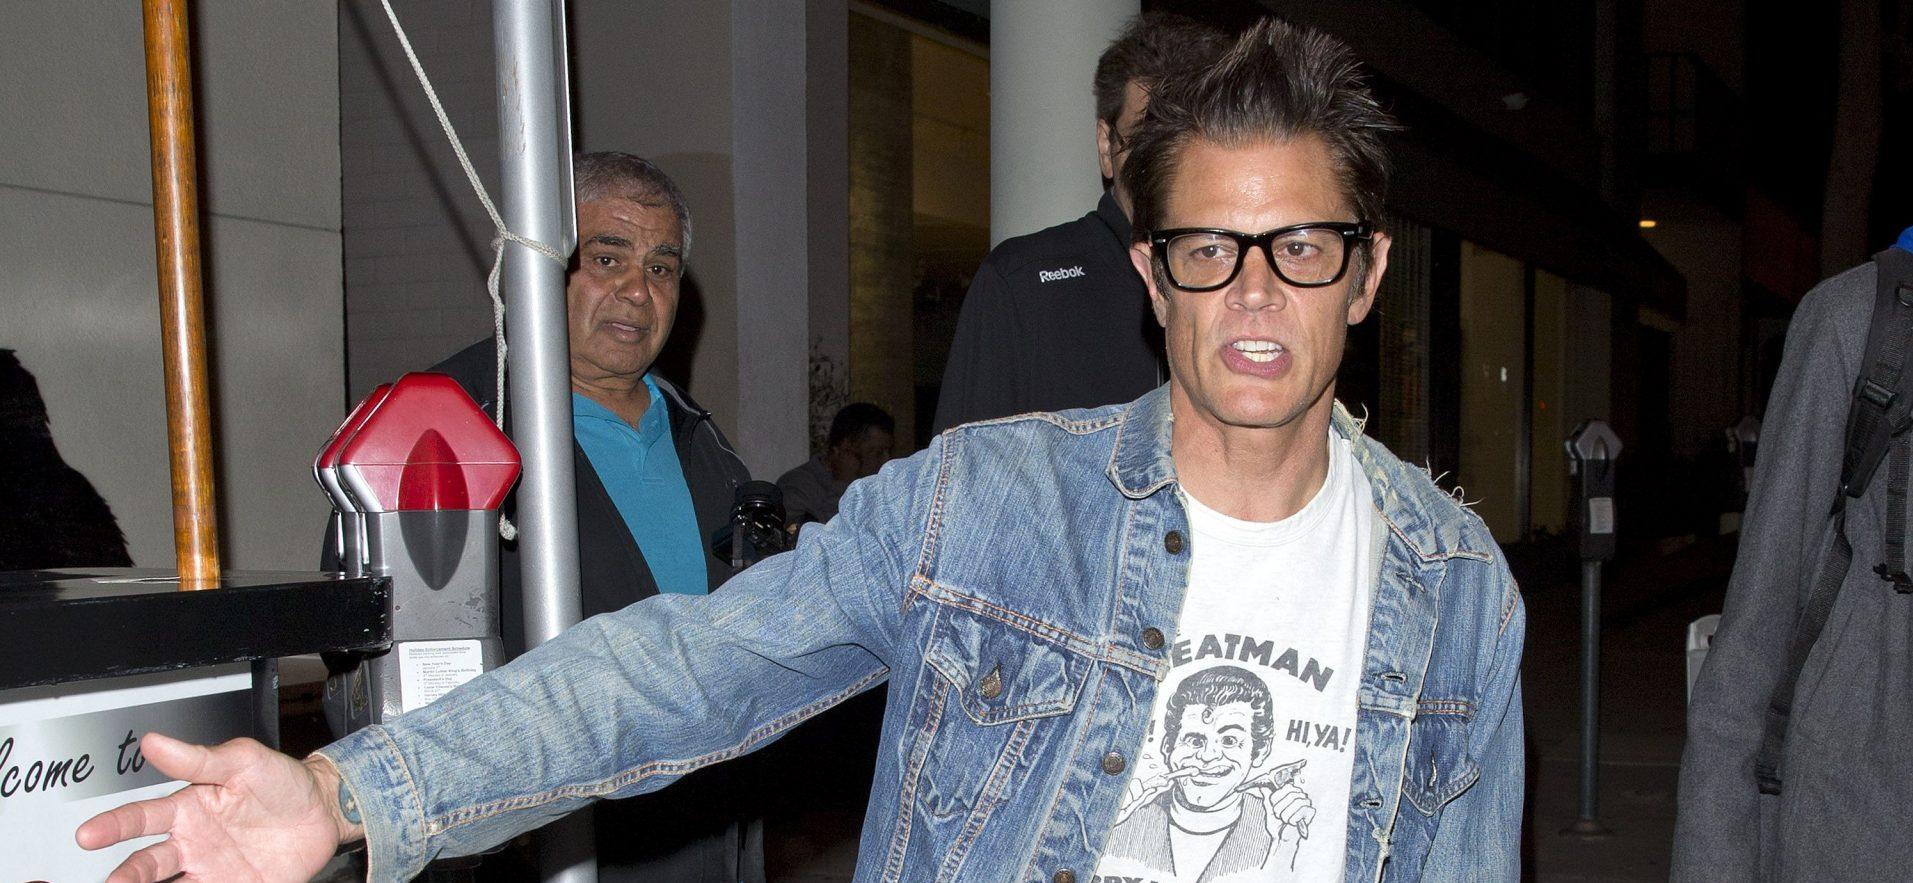 Johnny Knoxville seen leaving dinner at apos Craigs apos in West Hollywood CA